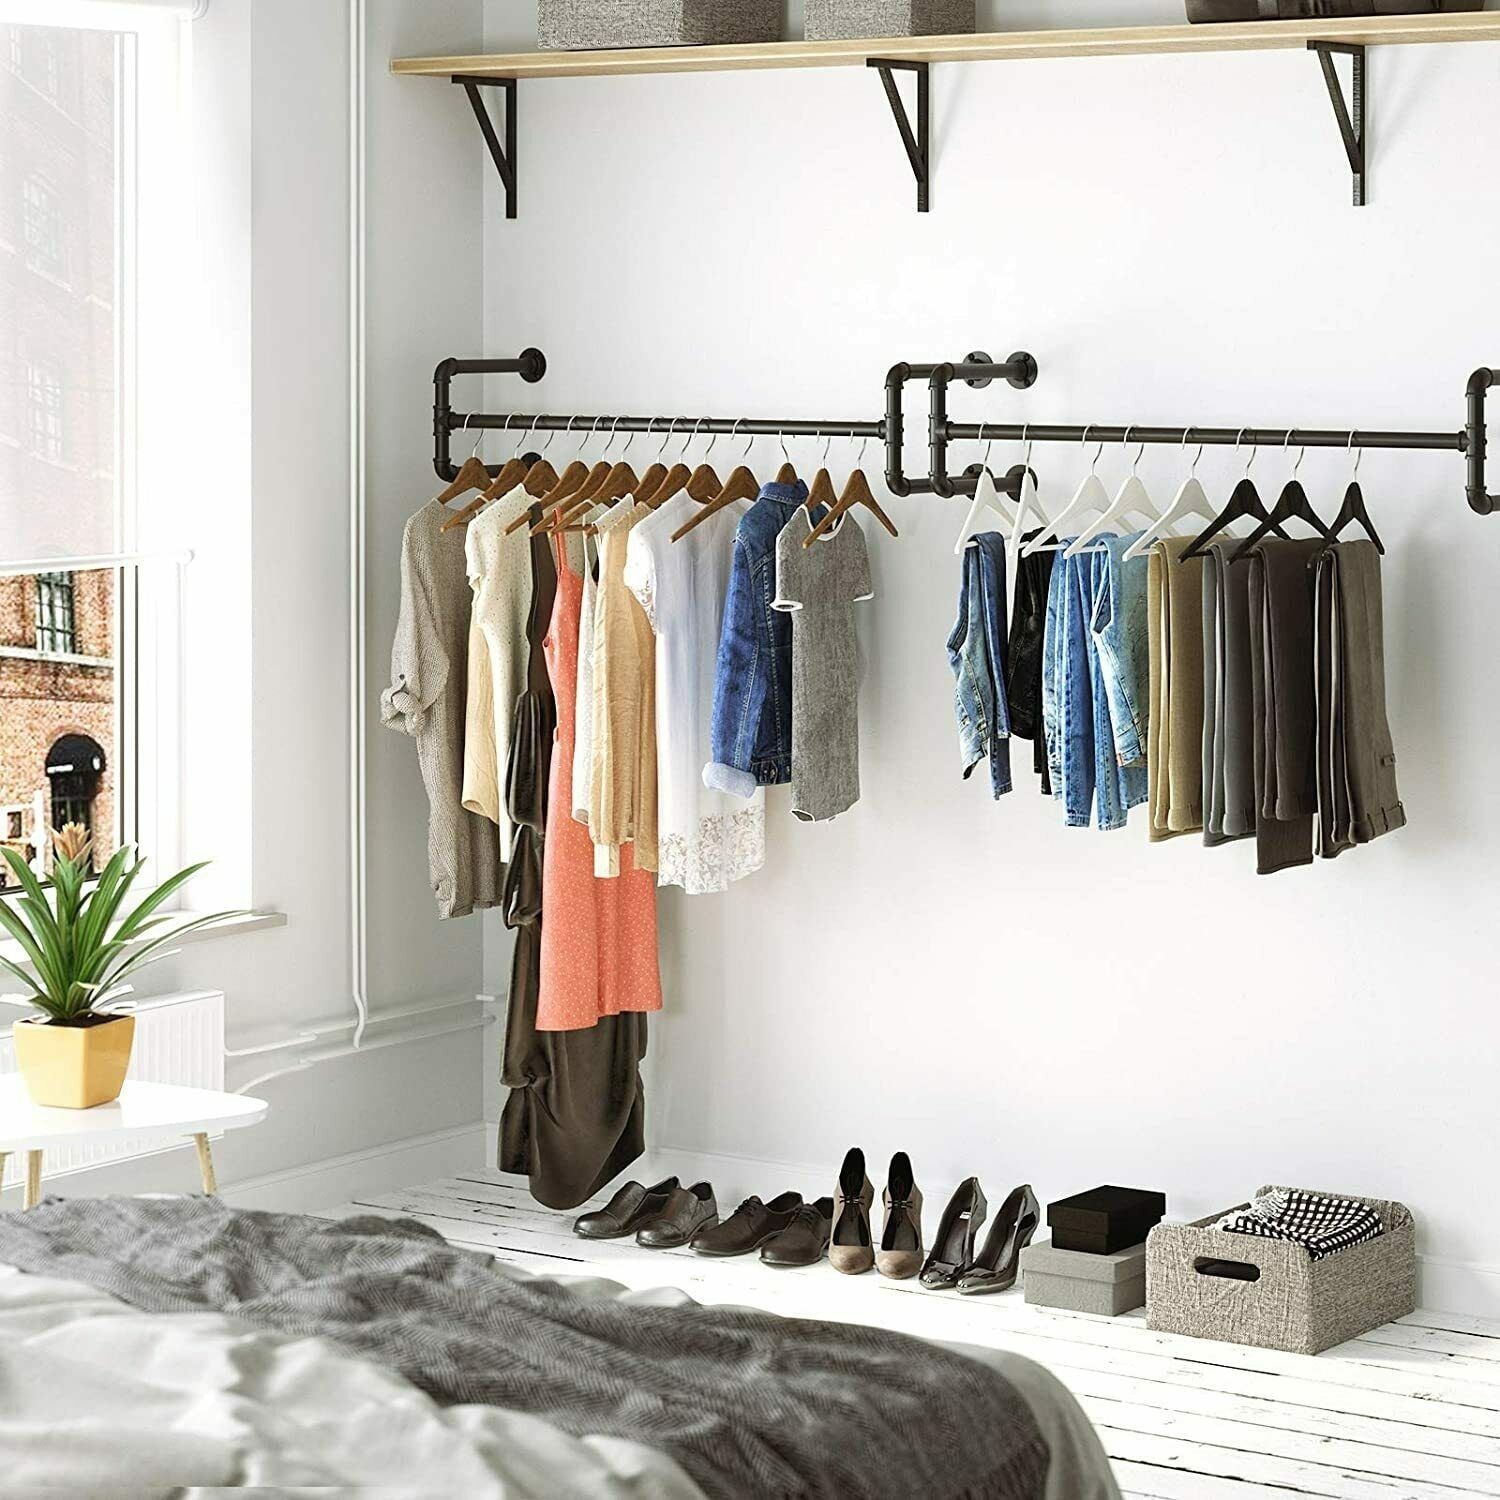 Industrial Pipe Clothes Rack Wall Mounted Hanging Rod Rail Garment – On  Sale – Bed Bath & Beyond – 35642863 Regarding Double Up Wardrobe Rails (View 15 of 15)